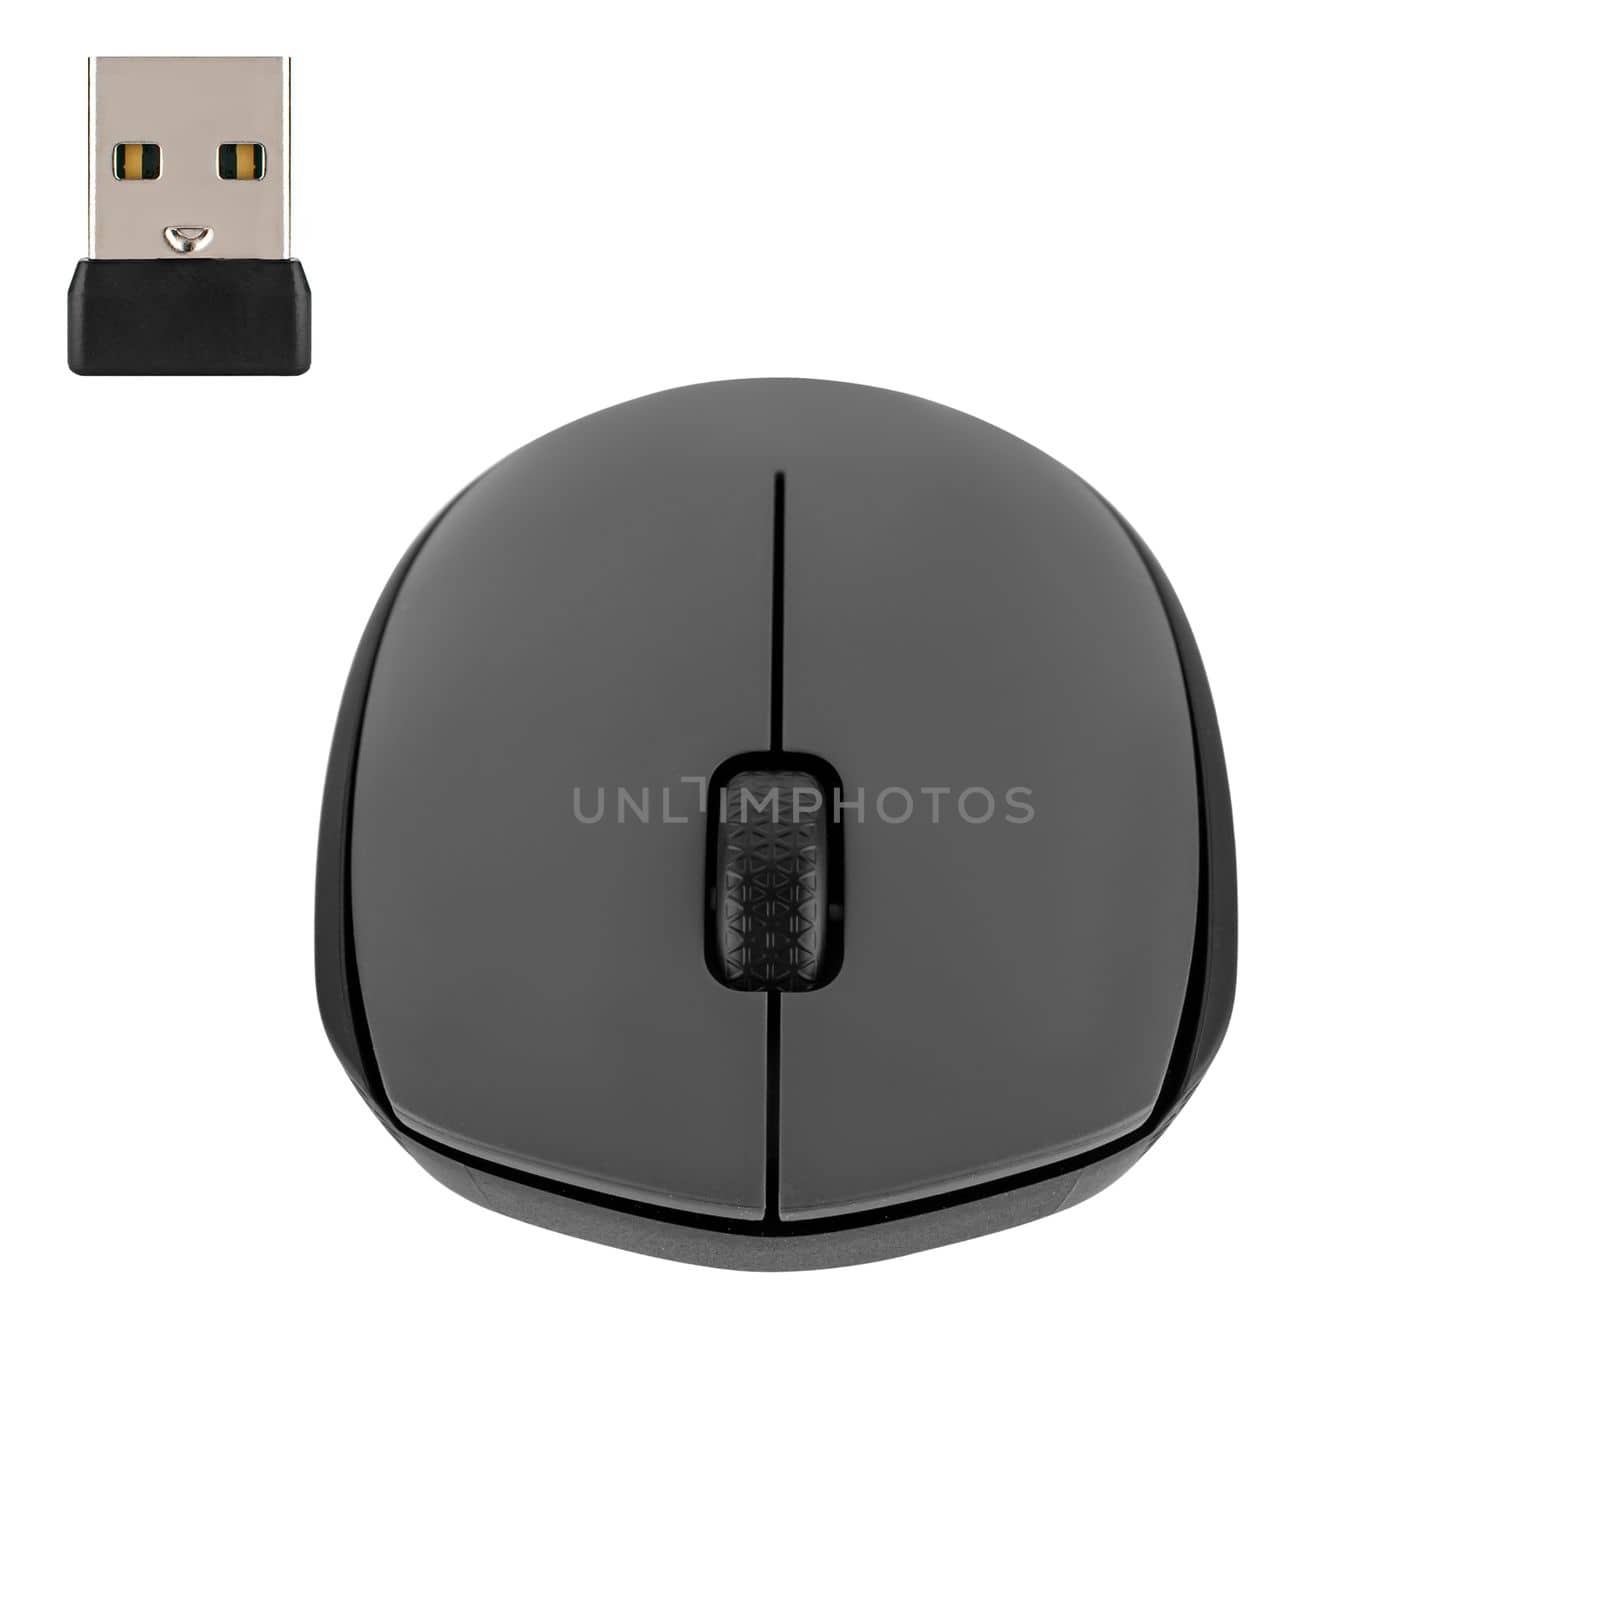 Wireless optical mouse for computer, white background in isolation by A_A